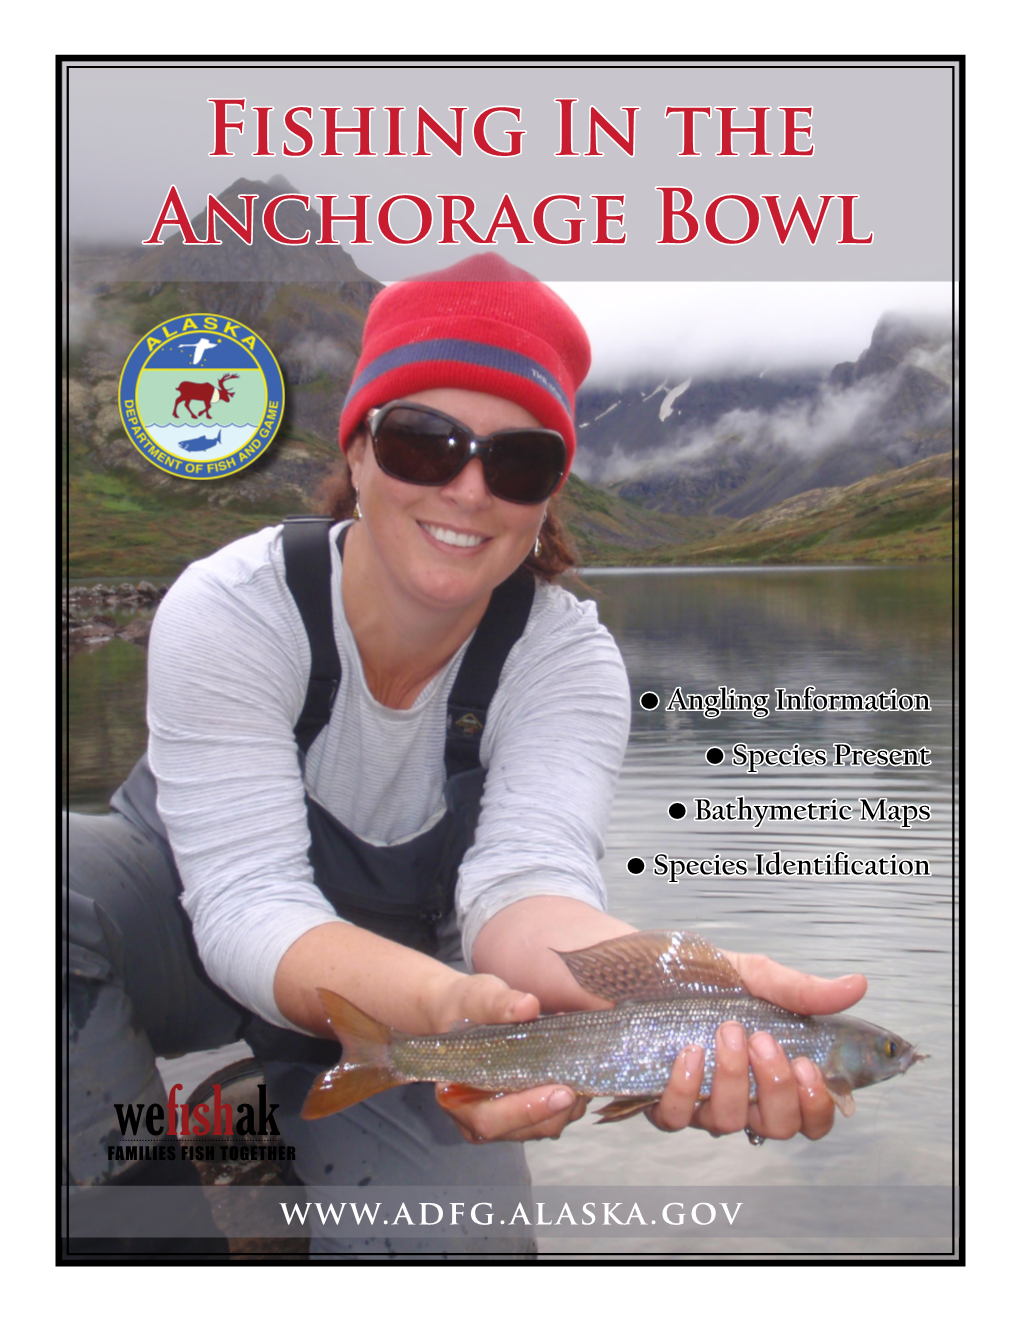 Fishing in the Anchorage Bowl